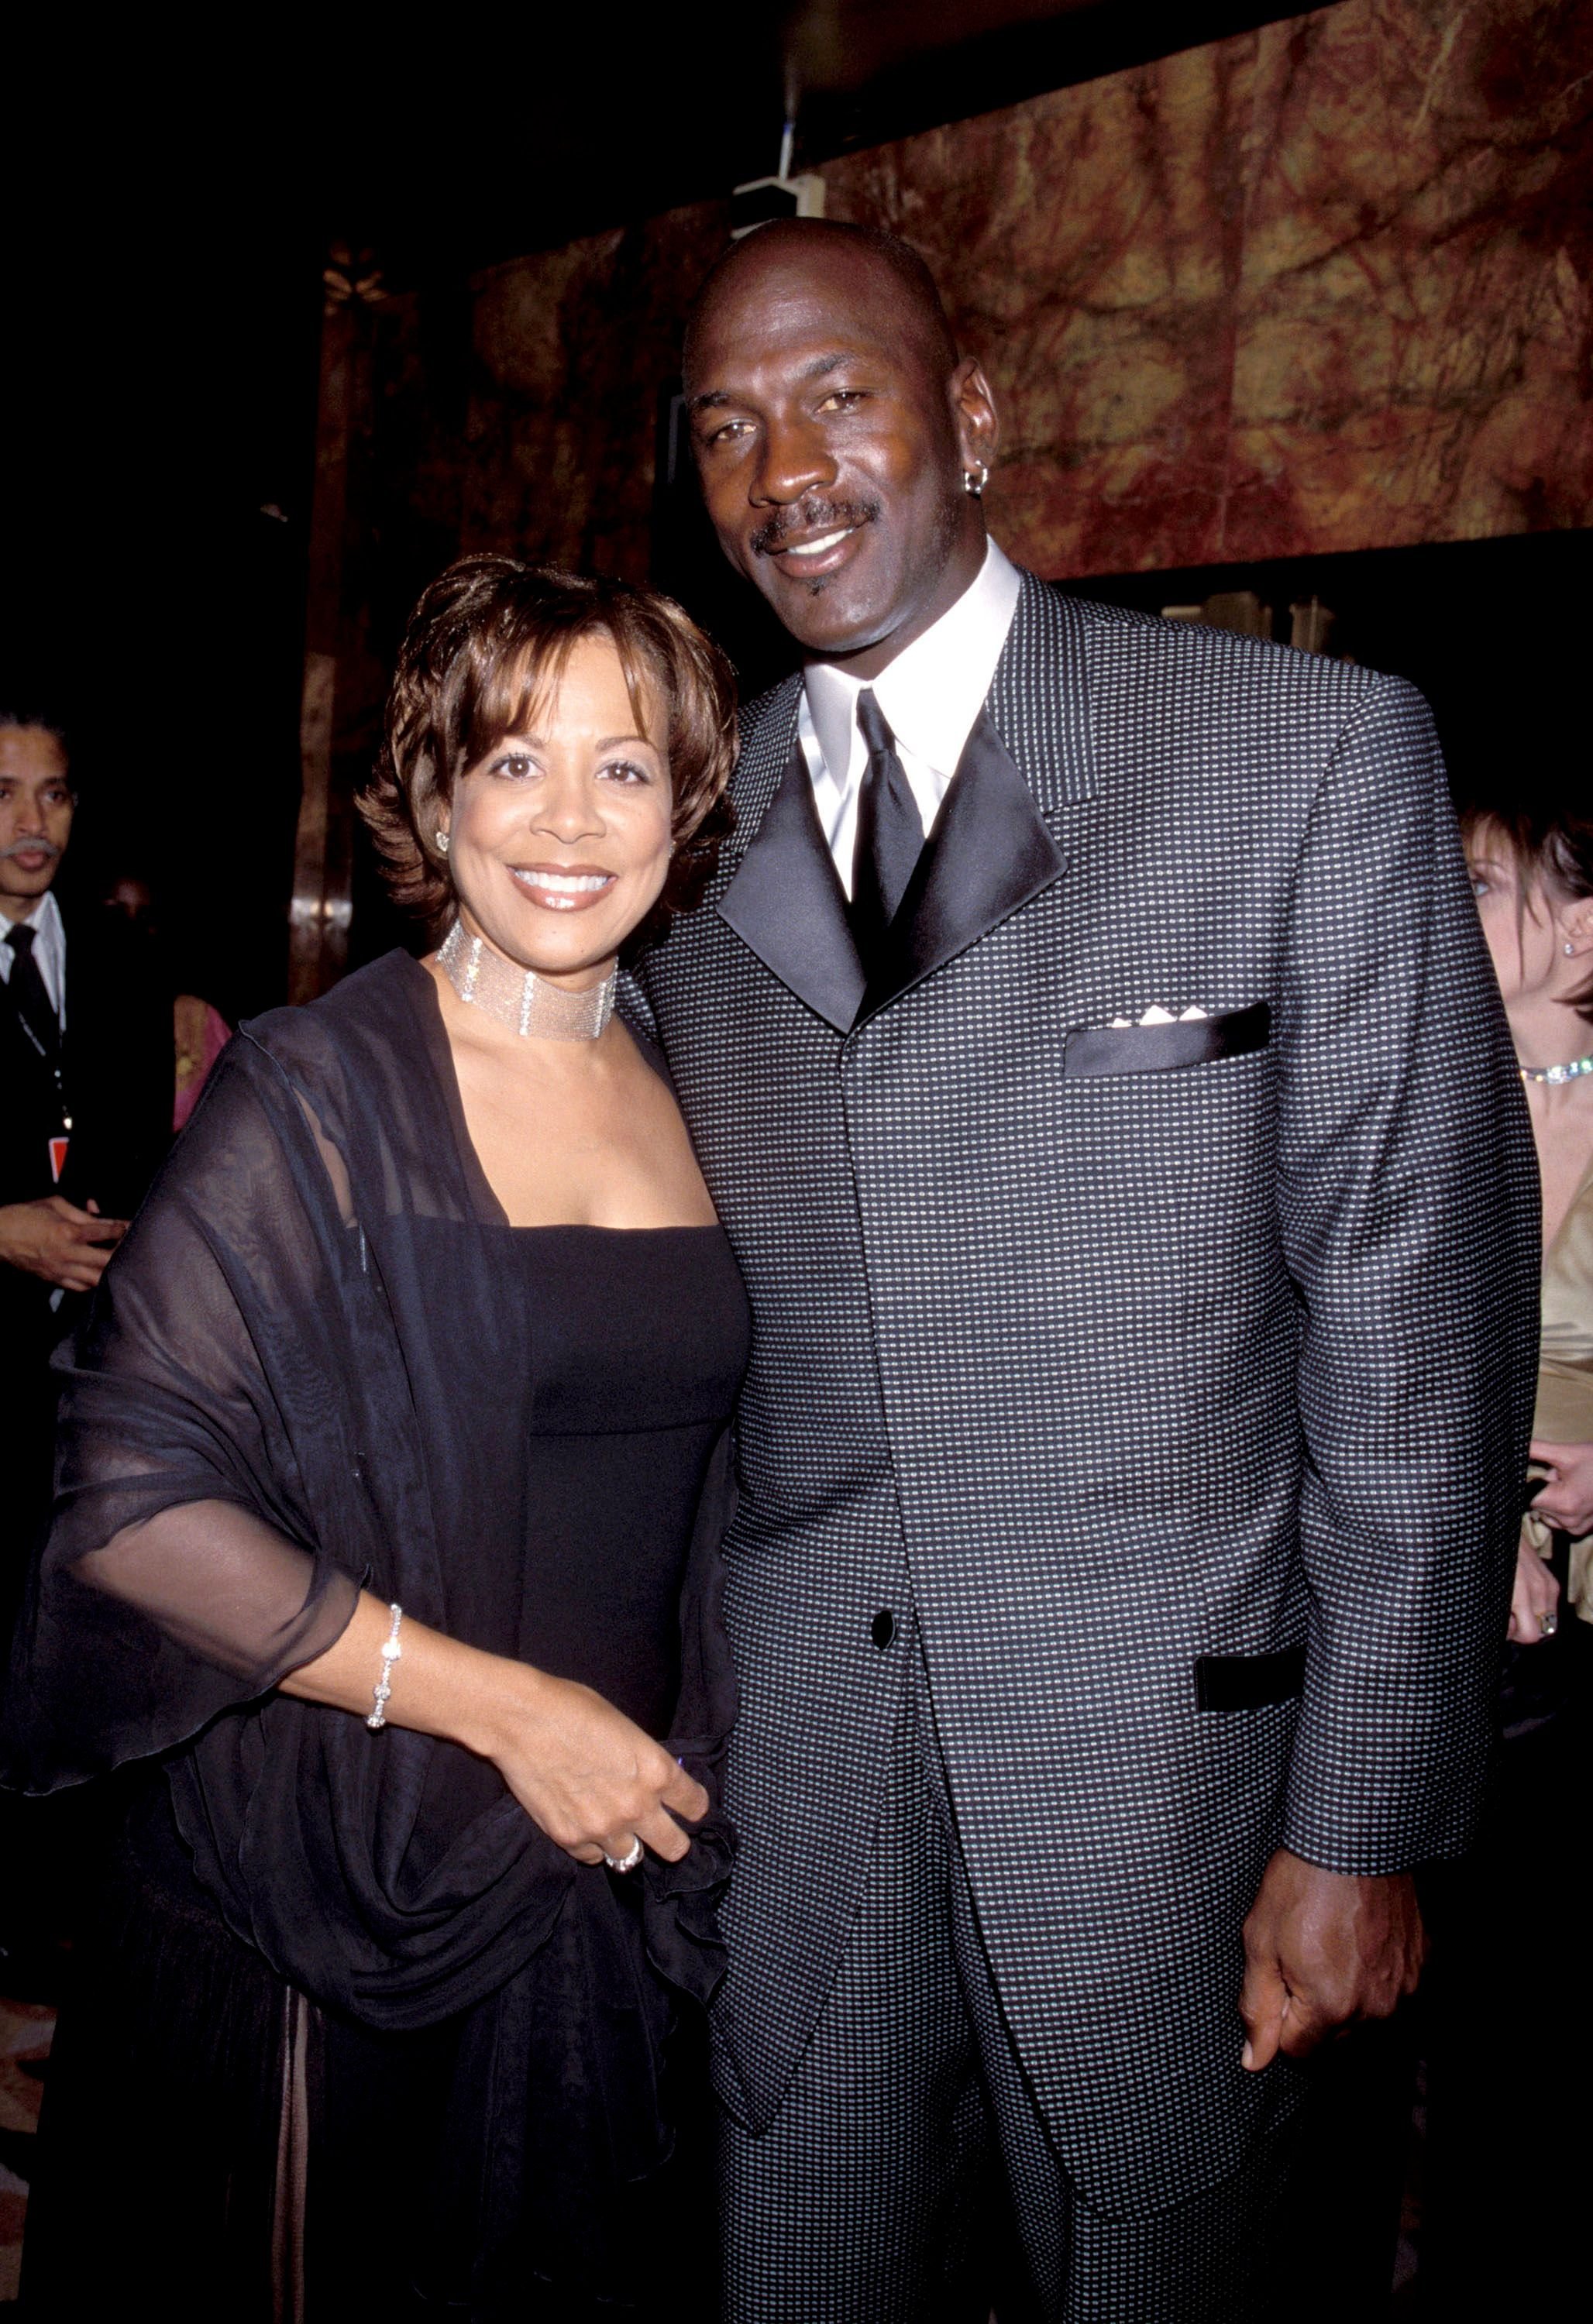 Michael Jordan (right) and Juanita Jordan at the Radio City Music Hall in New York City, New York (Photo by Kevin Mazur/WireImage)